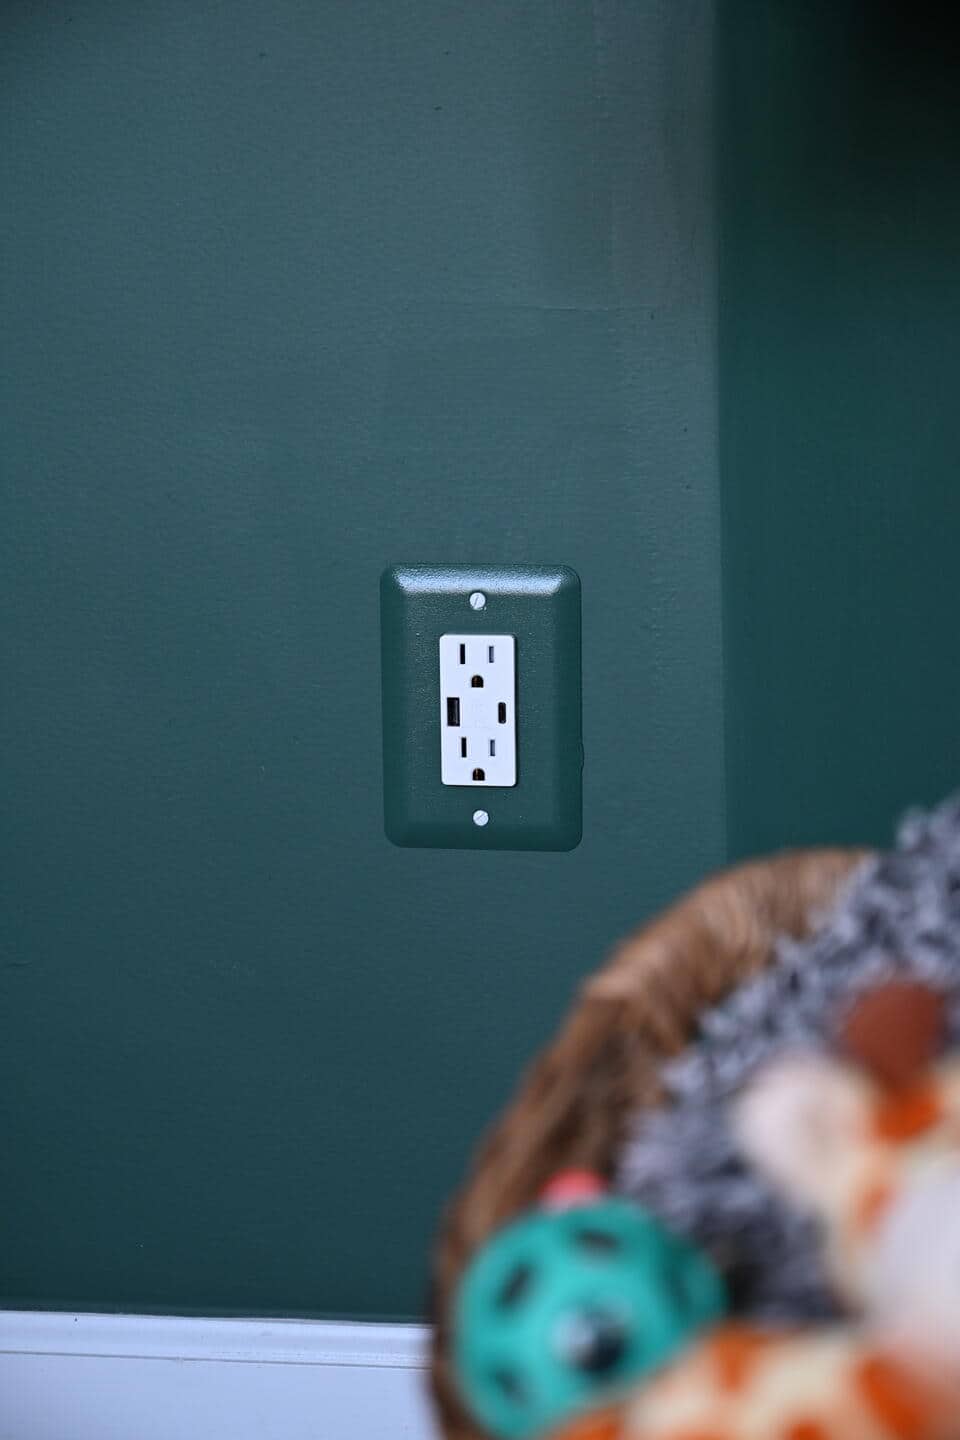 A close-up photo of the green-painted outlets that seamlessly blend into the green walls of the new office. These outlets have special plugs to be able to directly charge devices and appliances that are compatible with USB and lightening cable ports.